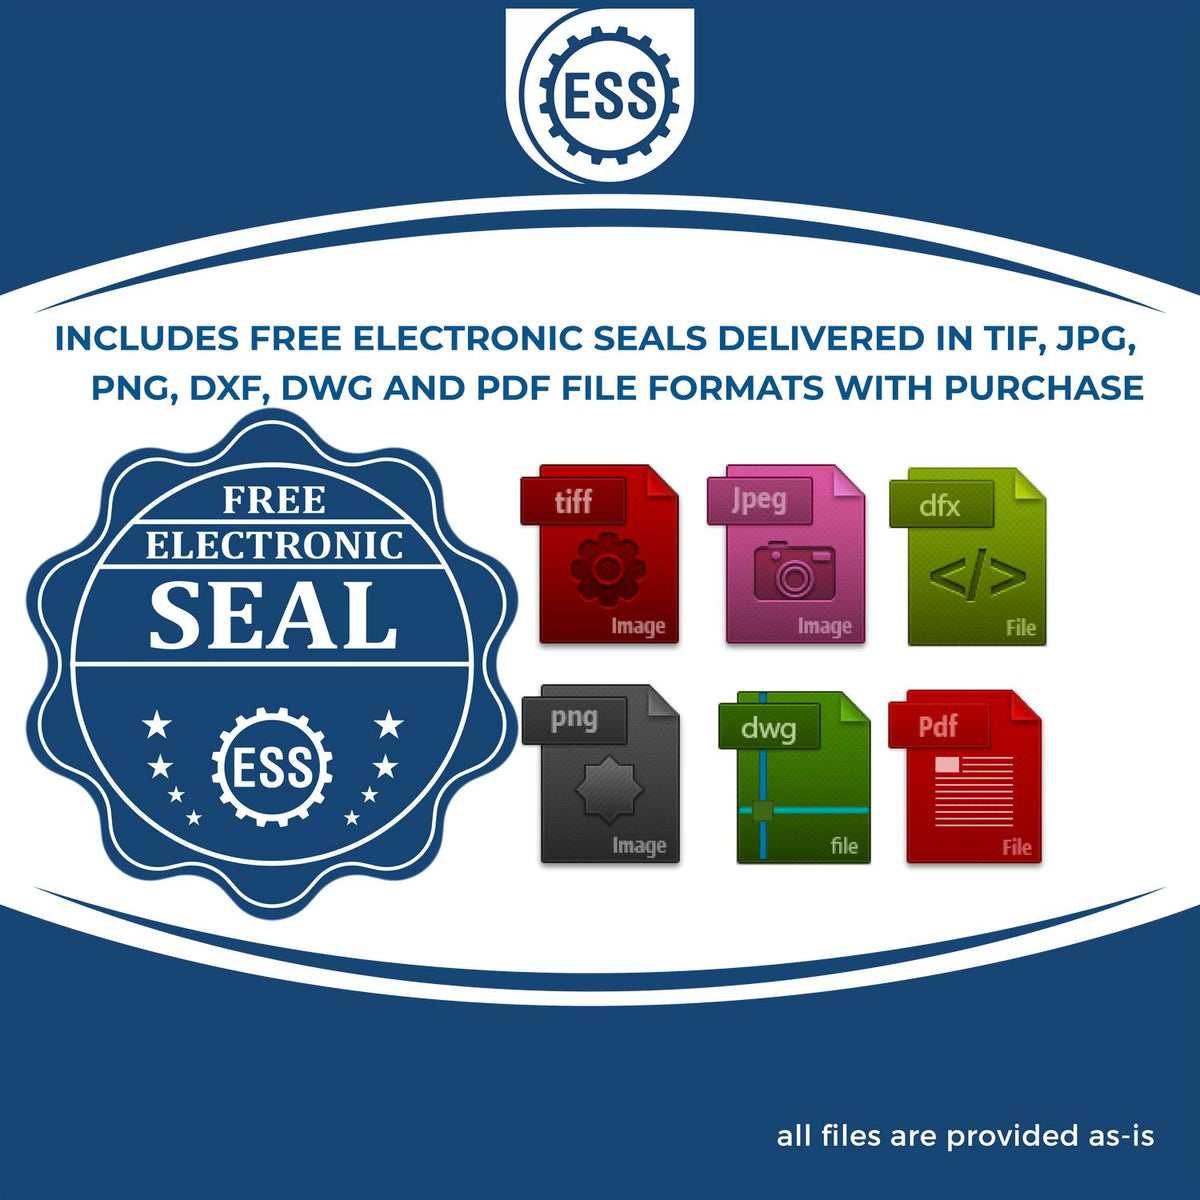 An infographic for the free electronic seal for the Handheld Connecticut Land Surveyor Seal illustrating the different file type icons such as DXF, DWG, TIF, JPG and PNG.